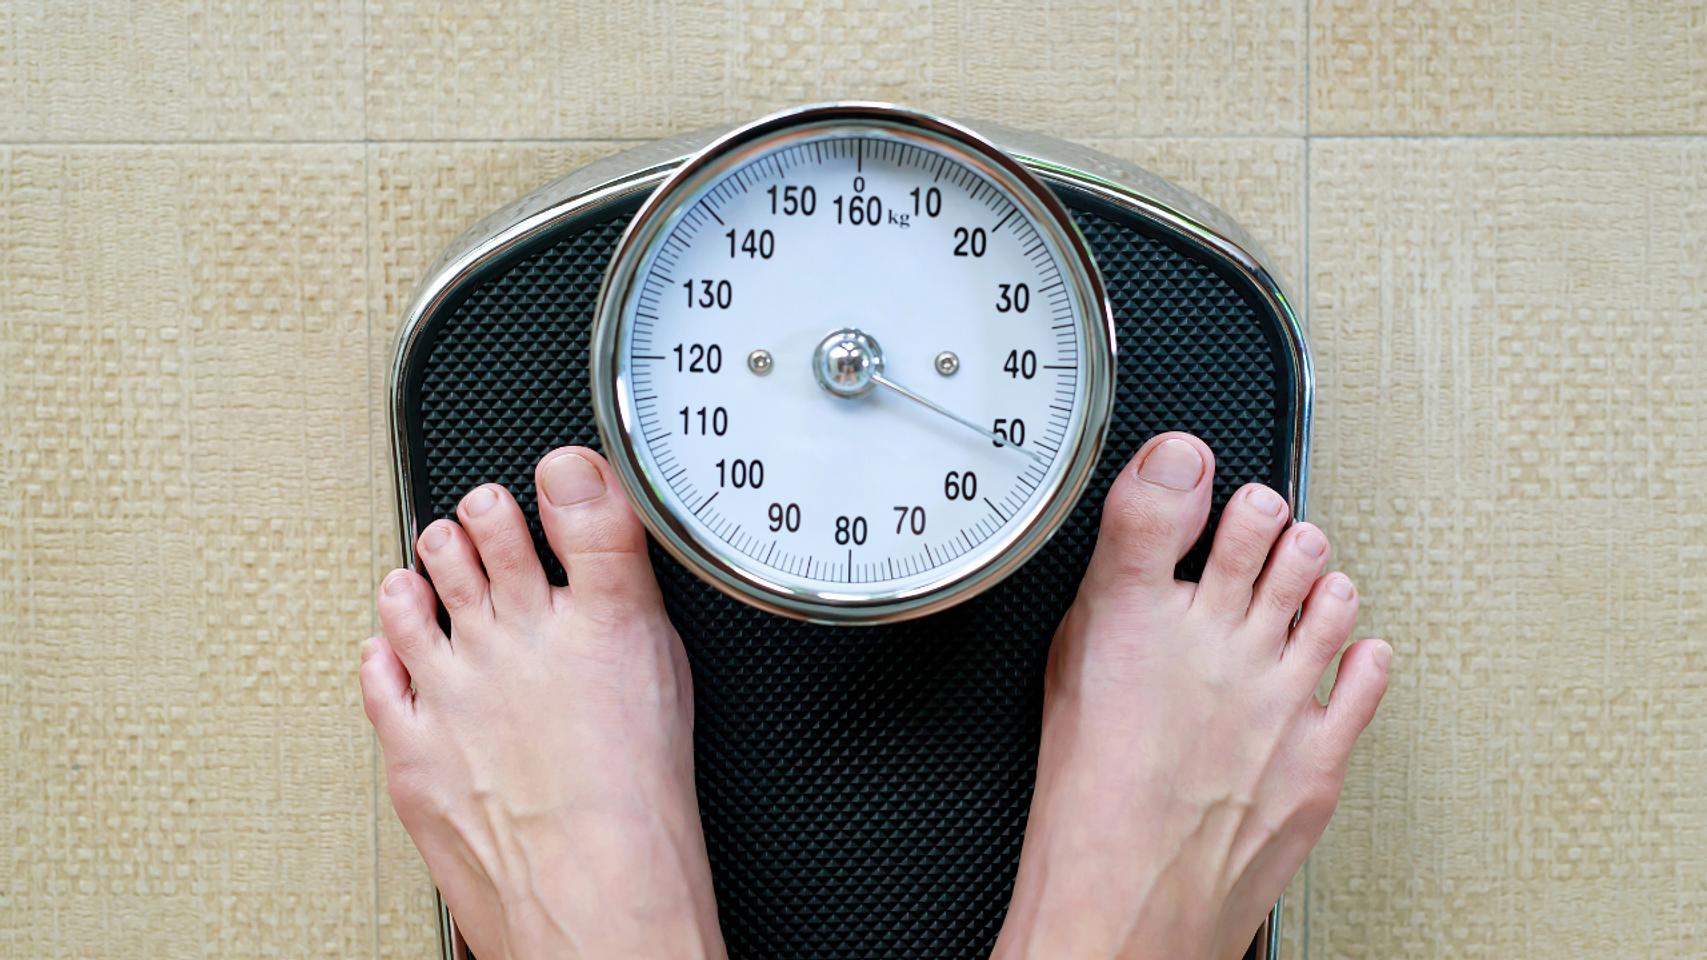 Why Your Scale Weight Will Always Fluctuate